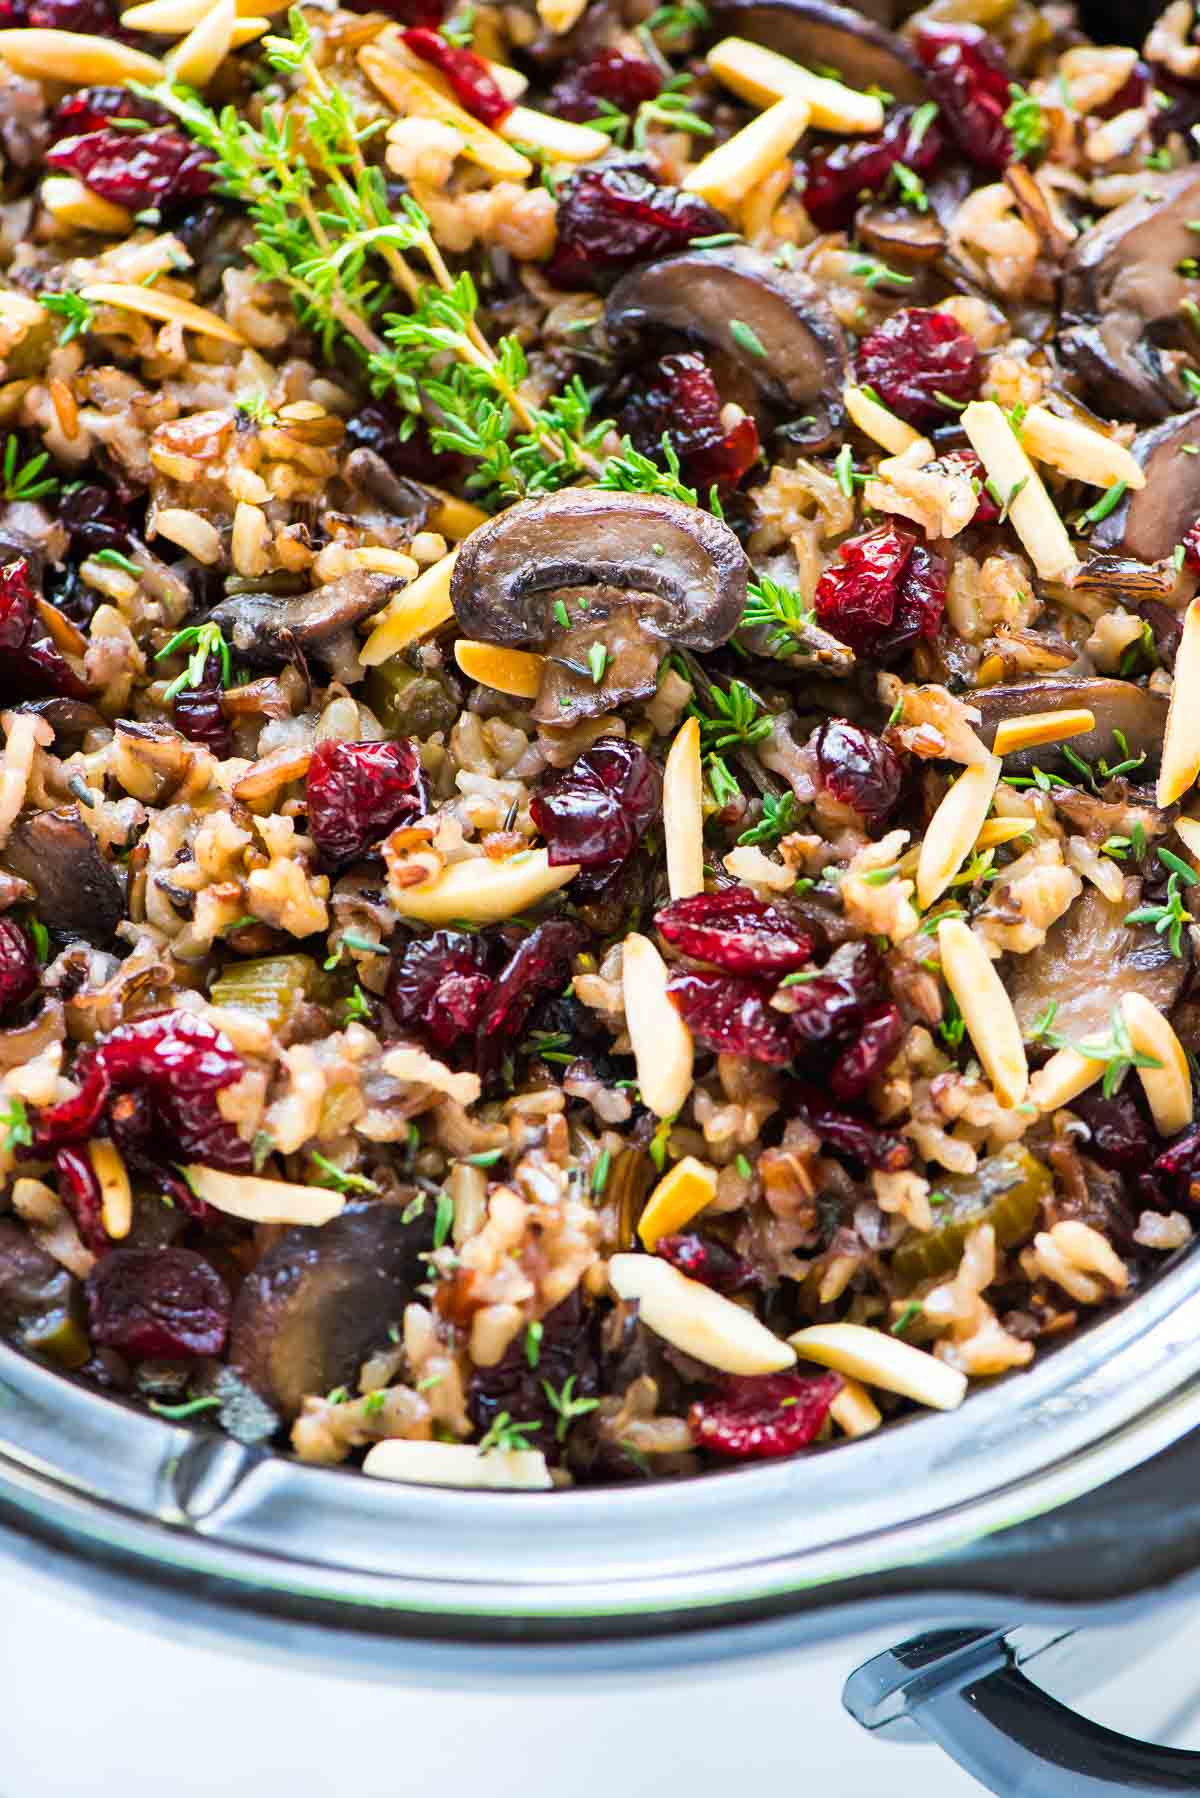 Thanksgiving Wild Rice Stuffing
 Crock Pot Stuffing with Wild Rice Cranberries and Almonds